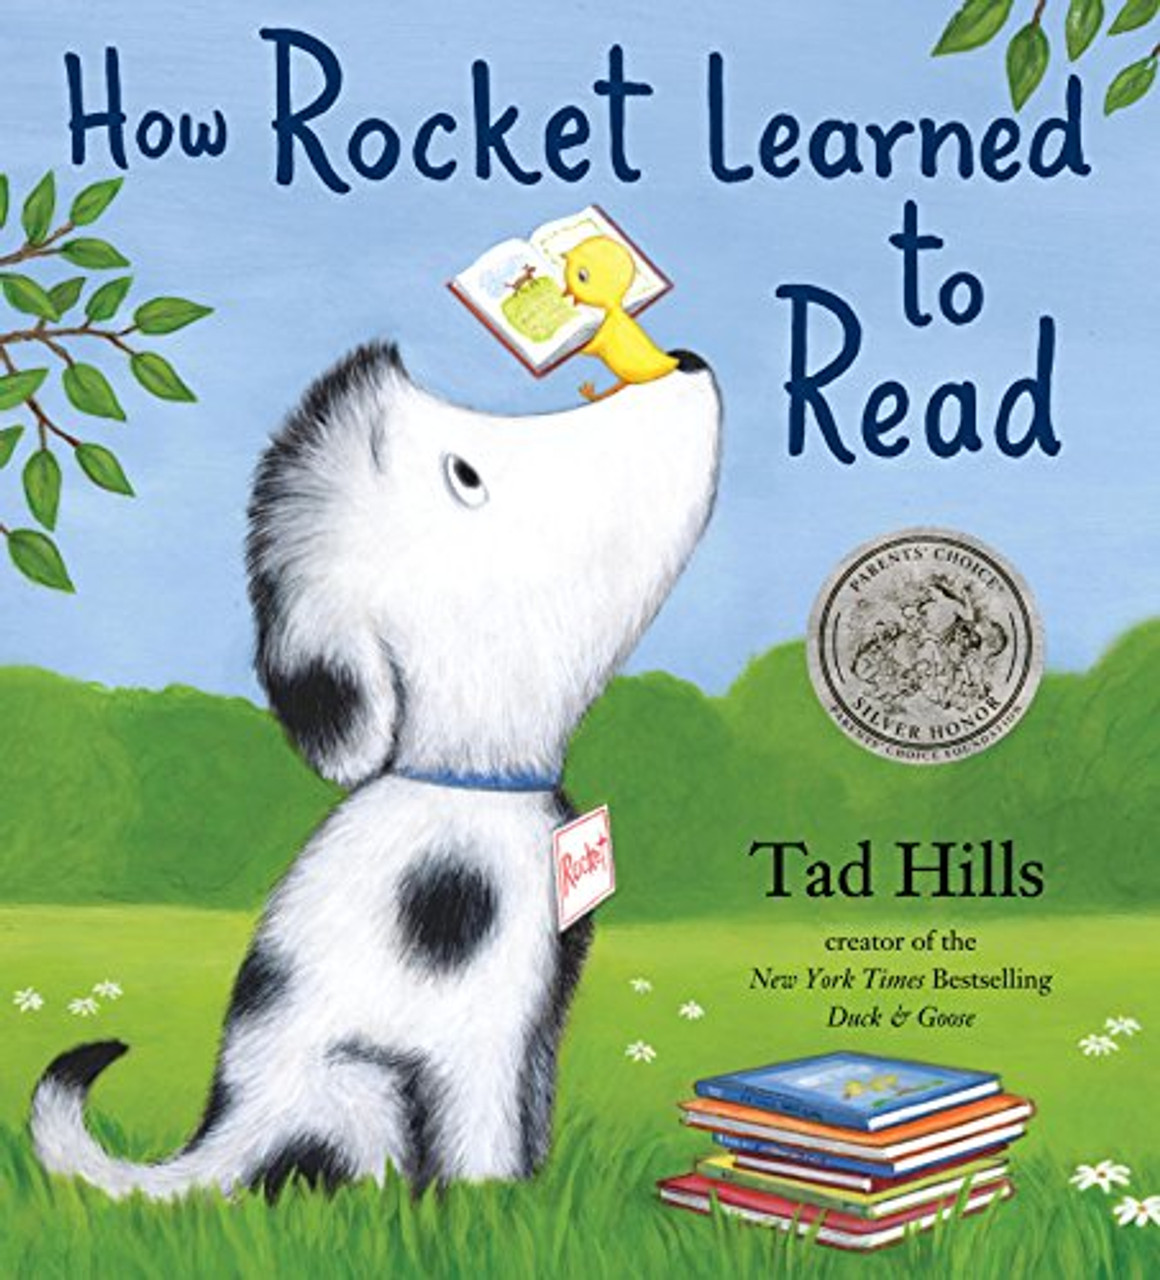 A little yellow bird teaches Rocket the dog how to read by first introducing him to the wondrous, mighty, gorgeous alphabet